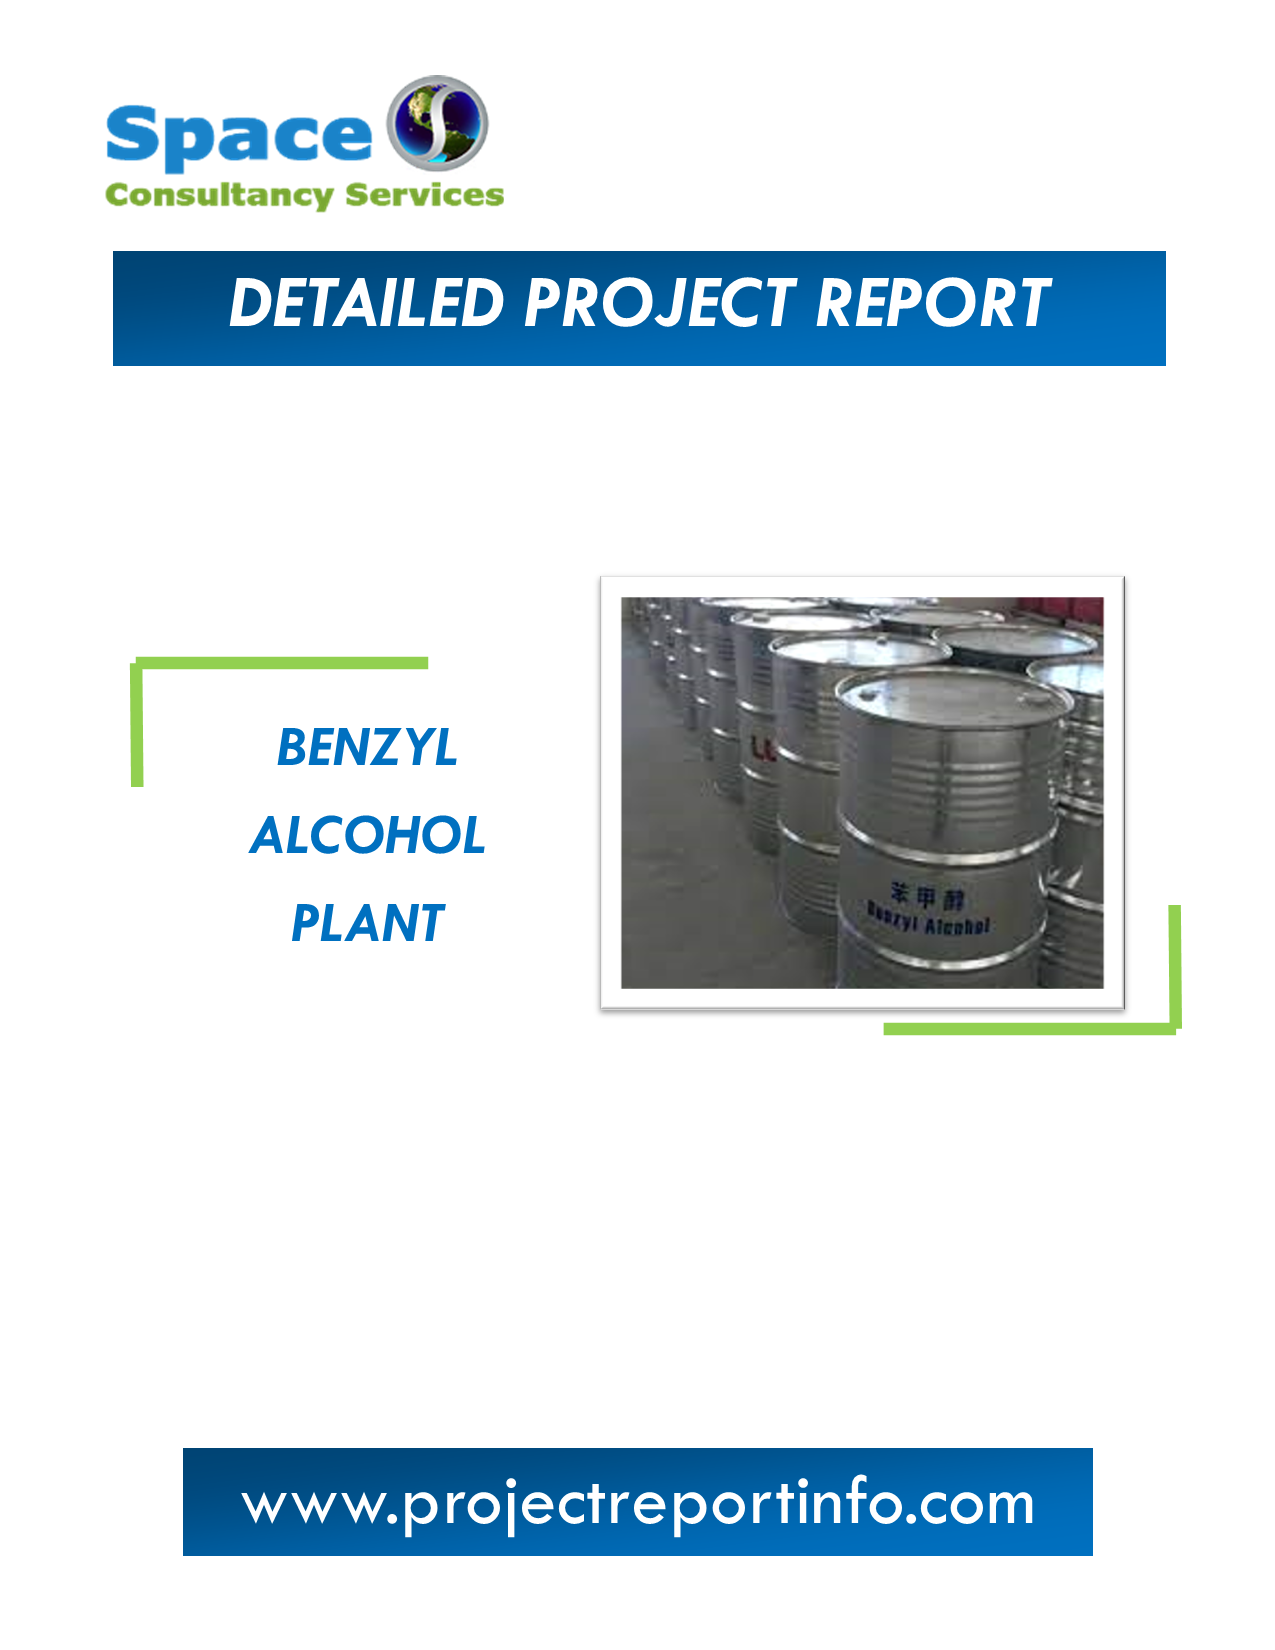 Project Report on Benzyl Alcohol Plant